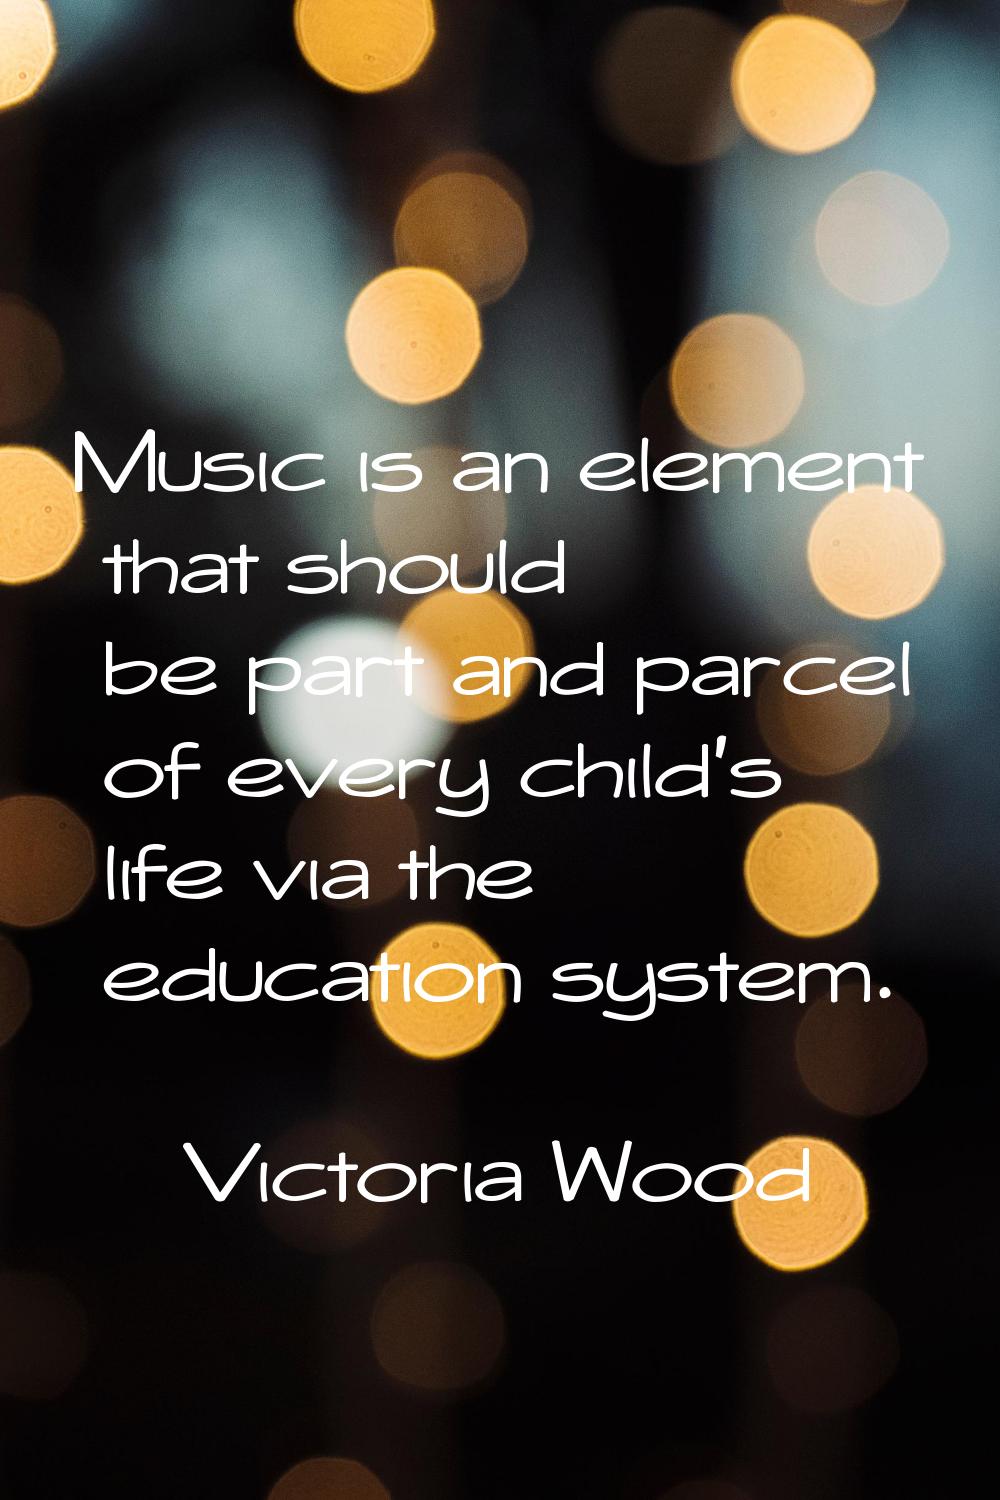 Music is an element that should be part and parcel of every child's life via the education system.